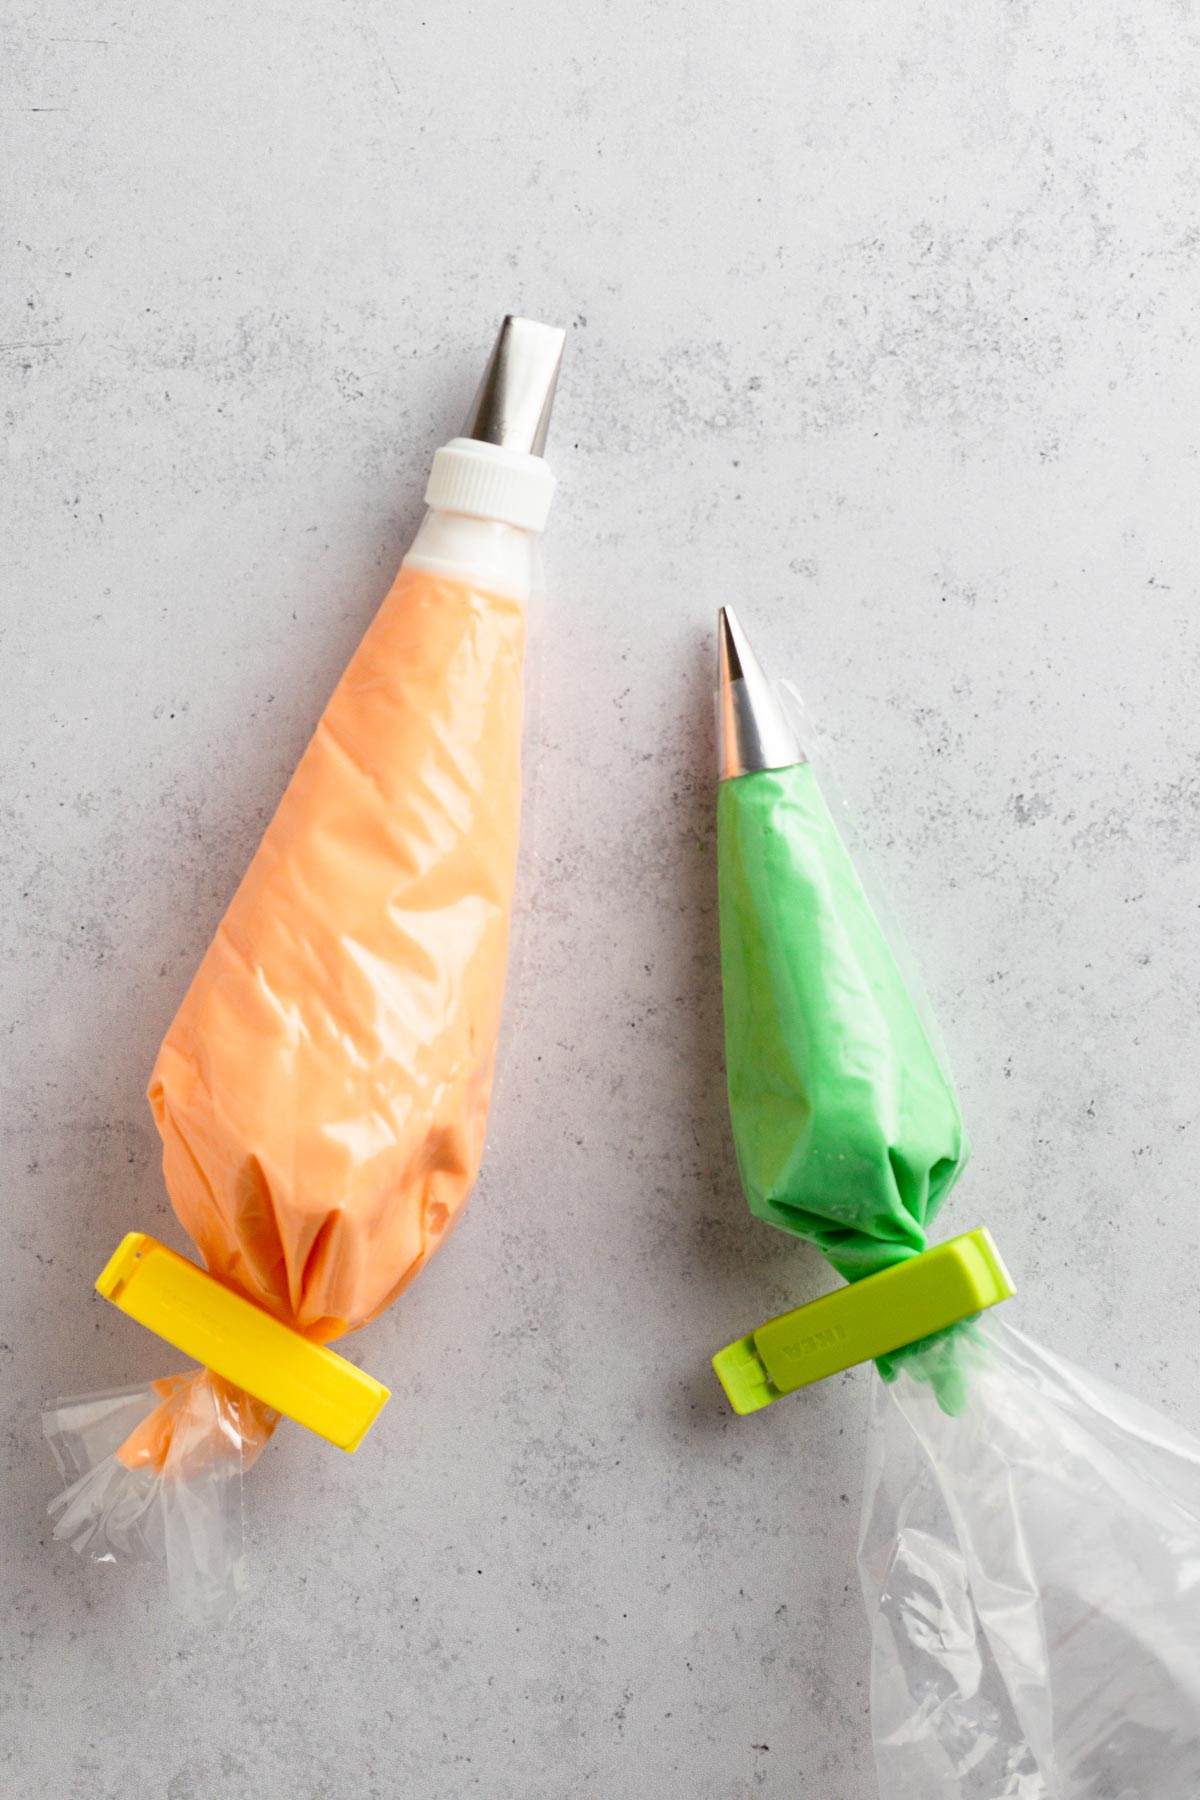 Orange and green frosting in pastry bags with piping tips.